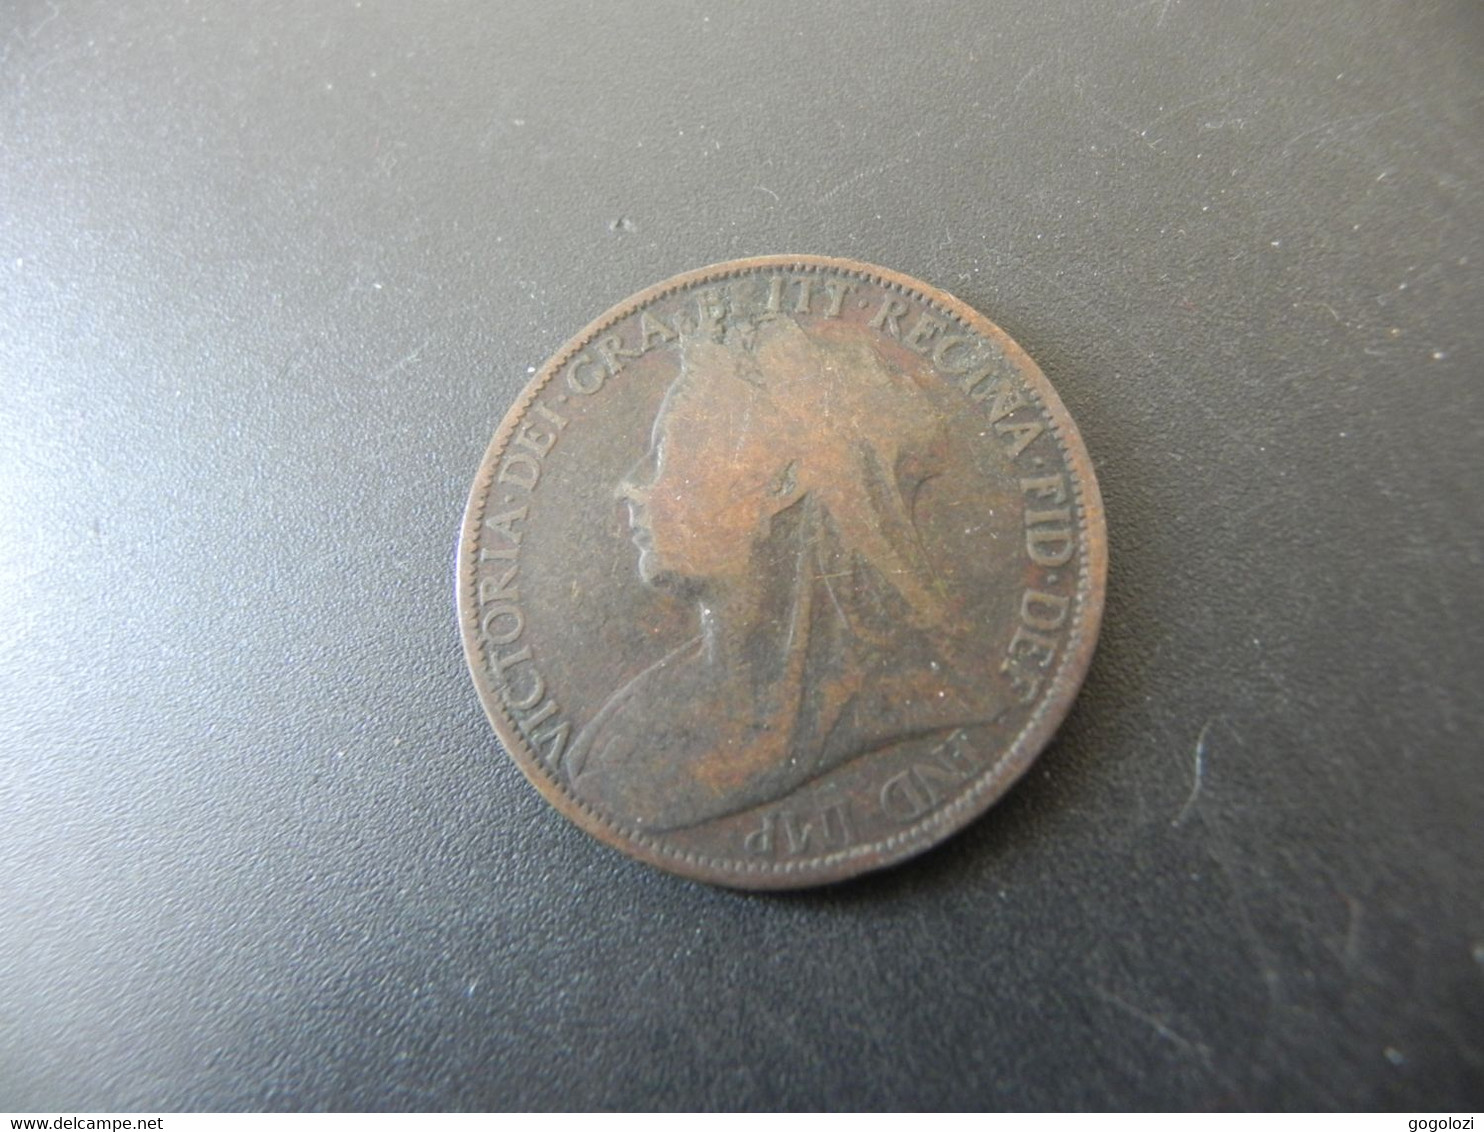 Great Britain 1 Penny 1896 - D. 1 Penny